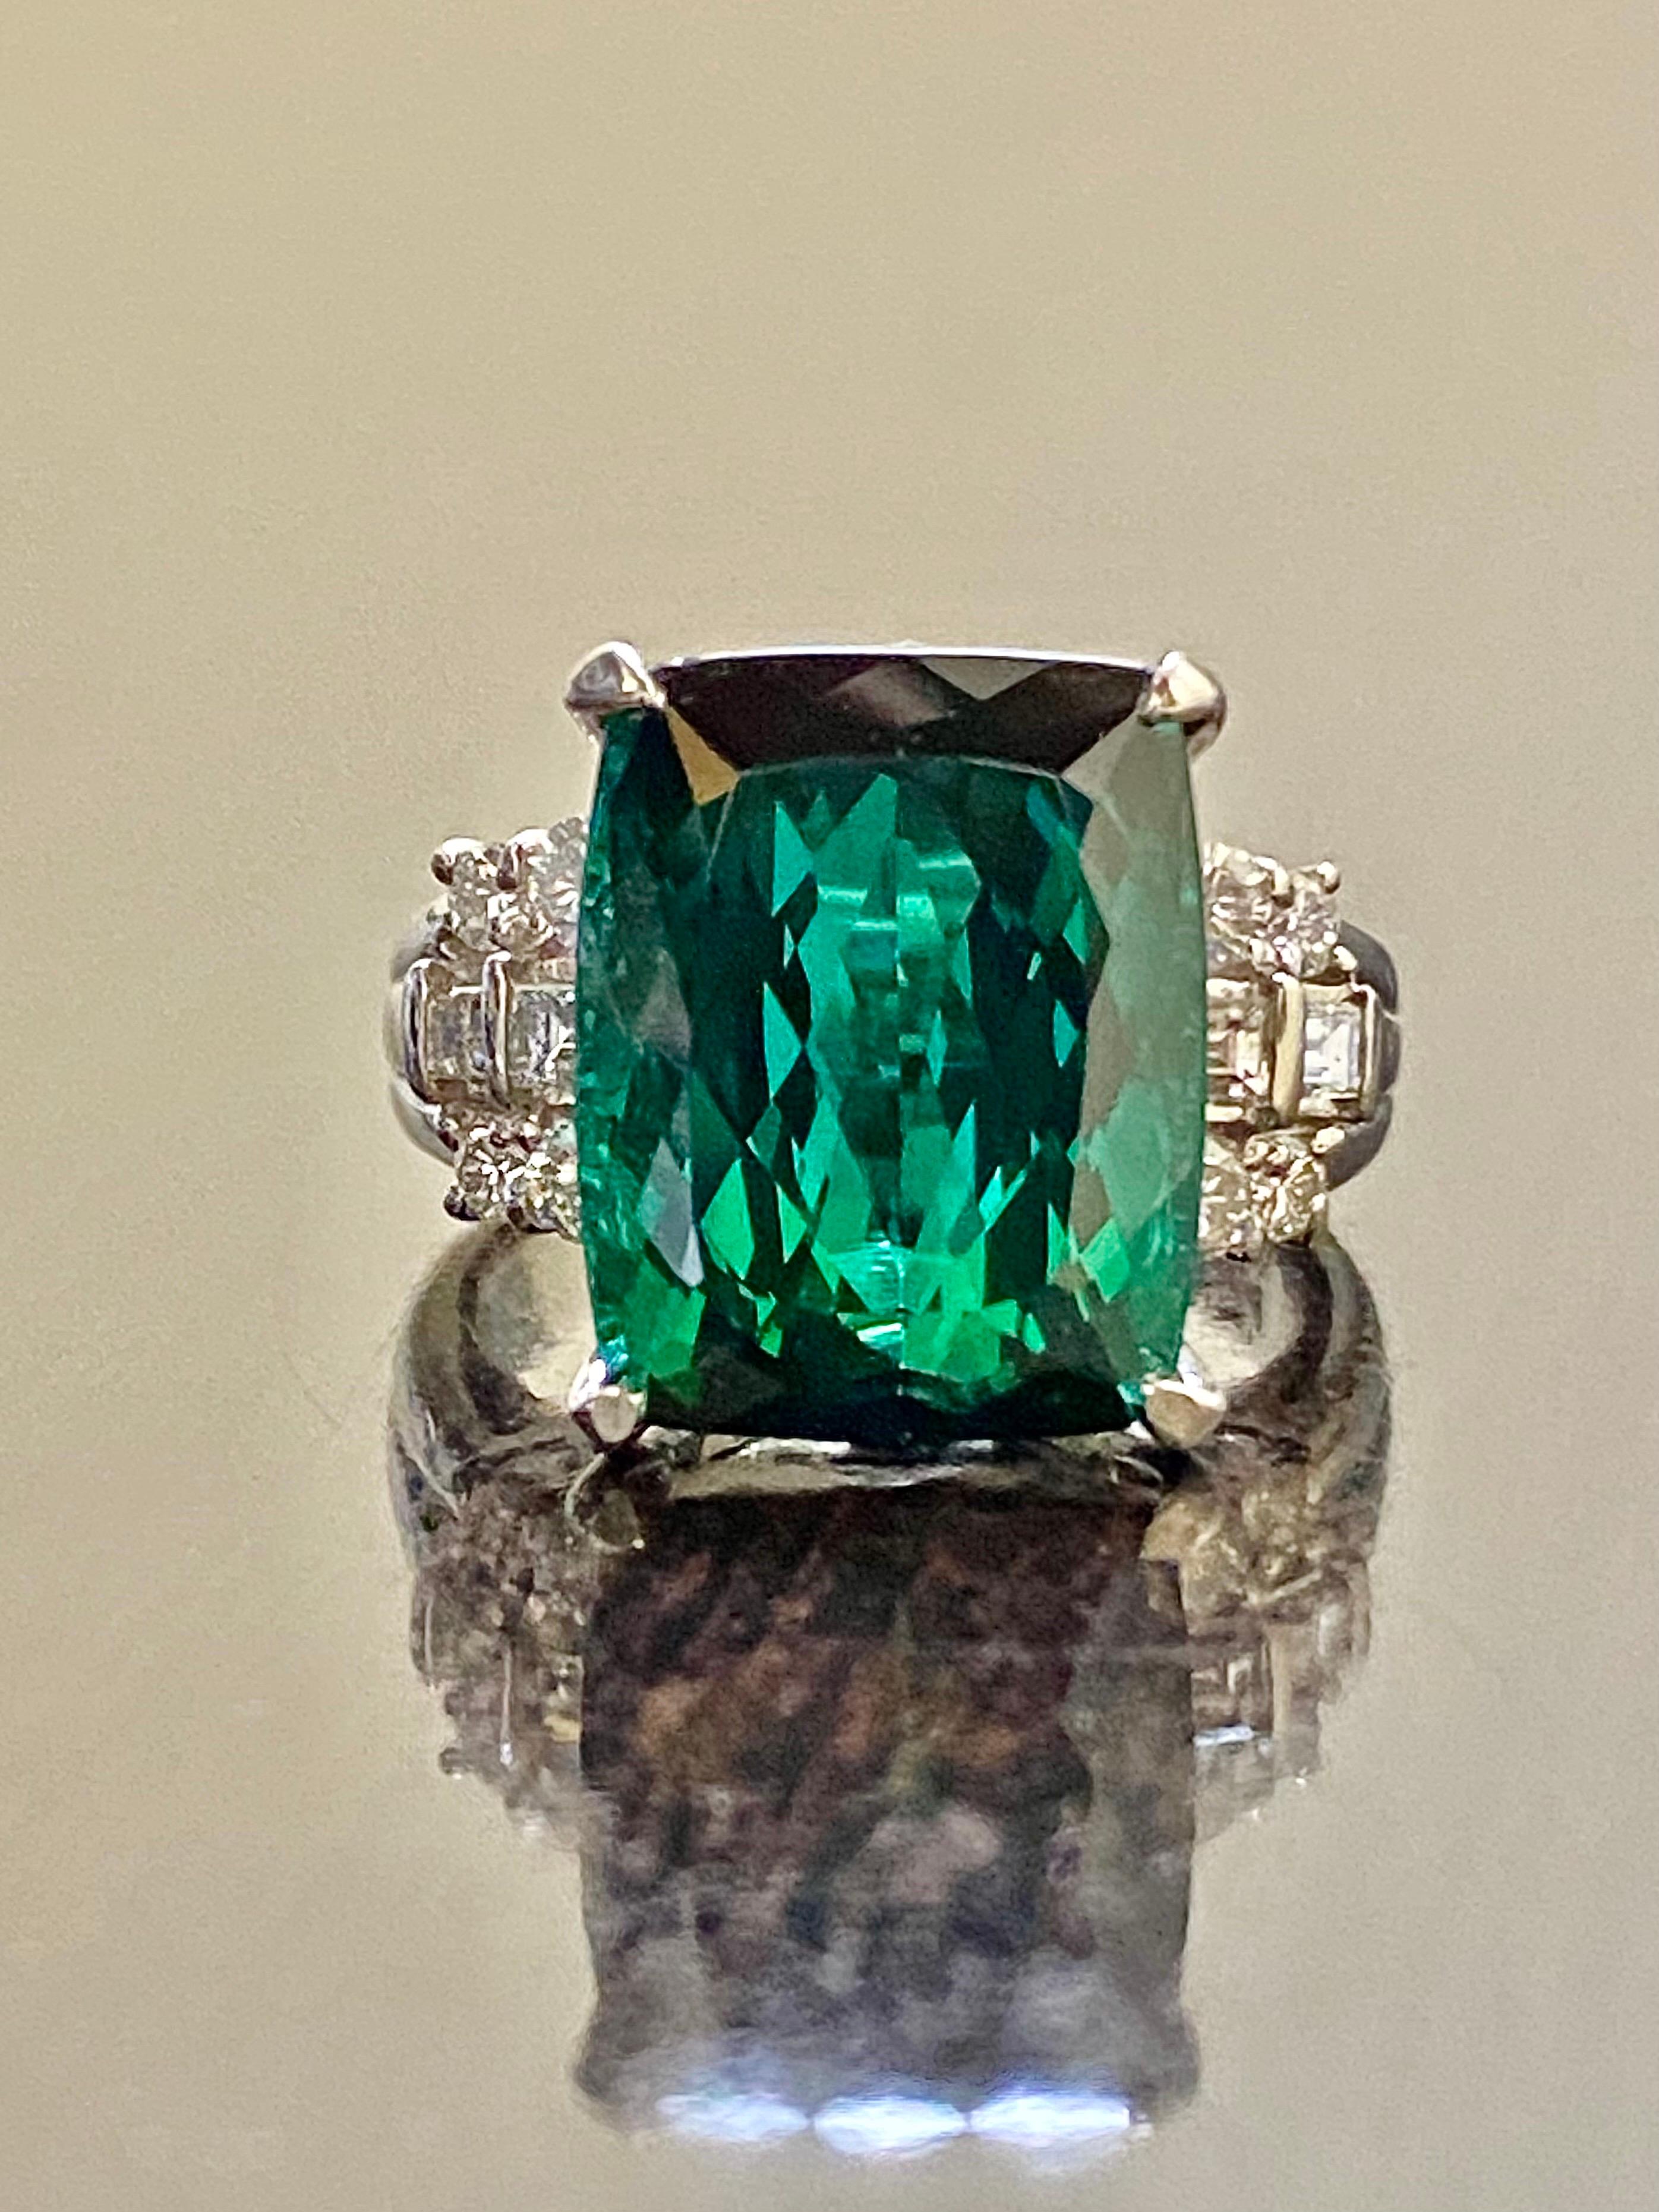 Buy 3 Carats Oval Indicolite Tourmaline Engagement Ring, Three Stone Teal  Green Tourmaline Promise Ring, Peacock Gemstone Ring, October Birthday  Online in India - Etsy